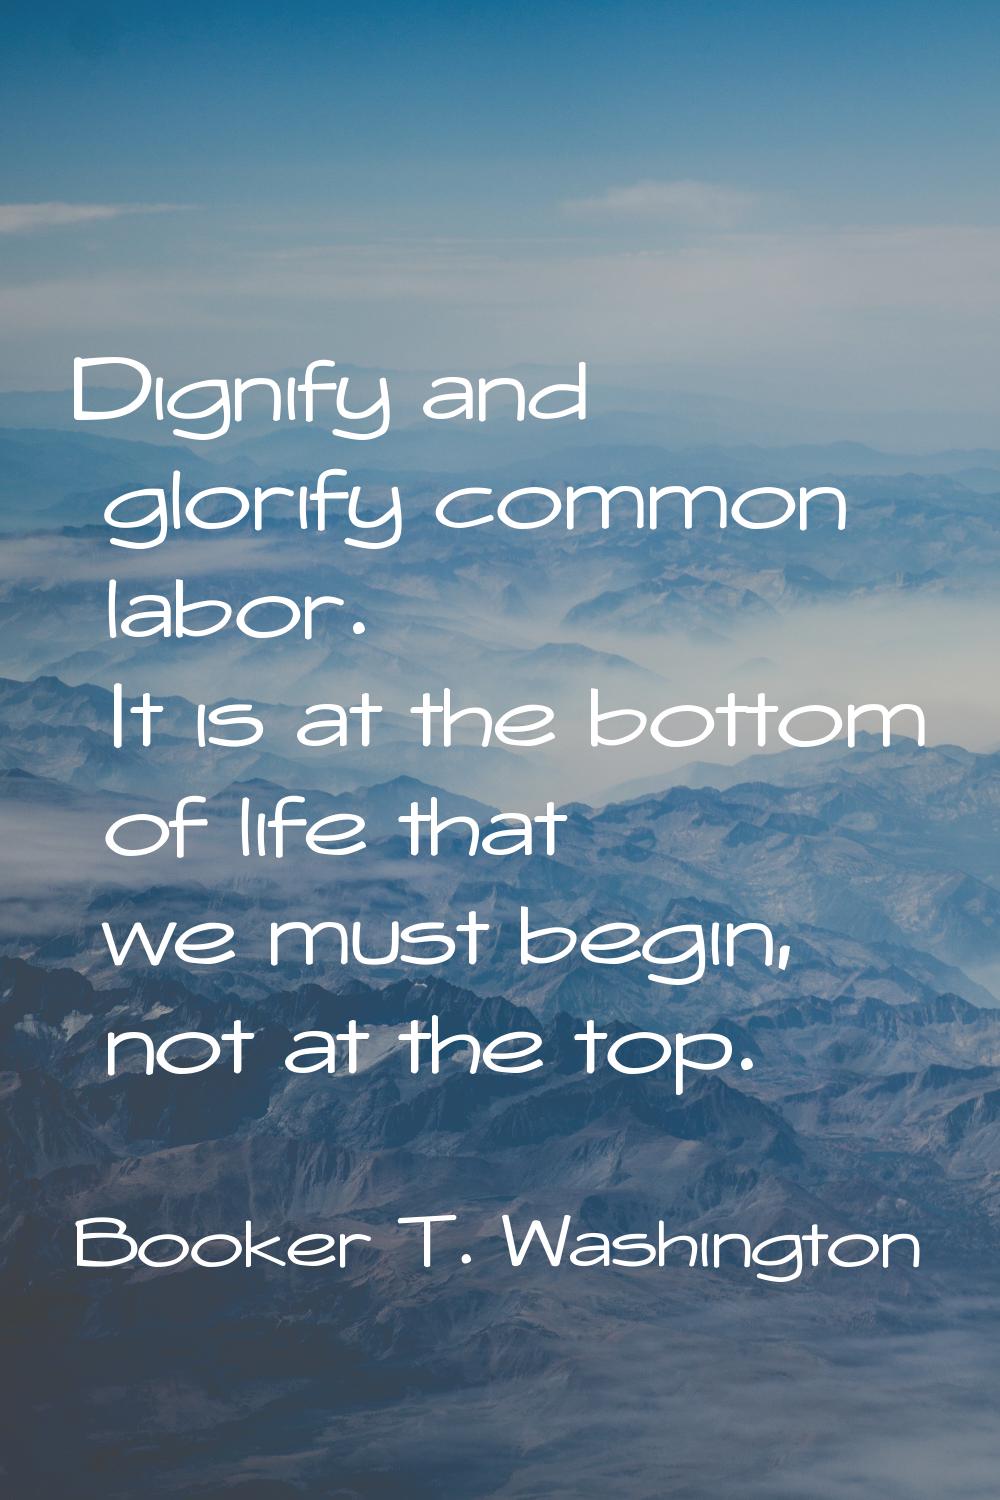 Dignify and glorify common labor. It is at the bottom of life that we must begin, not at the top.